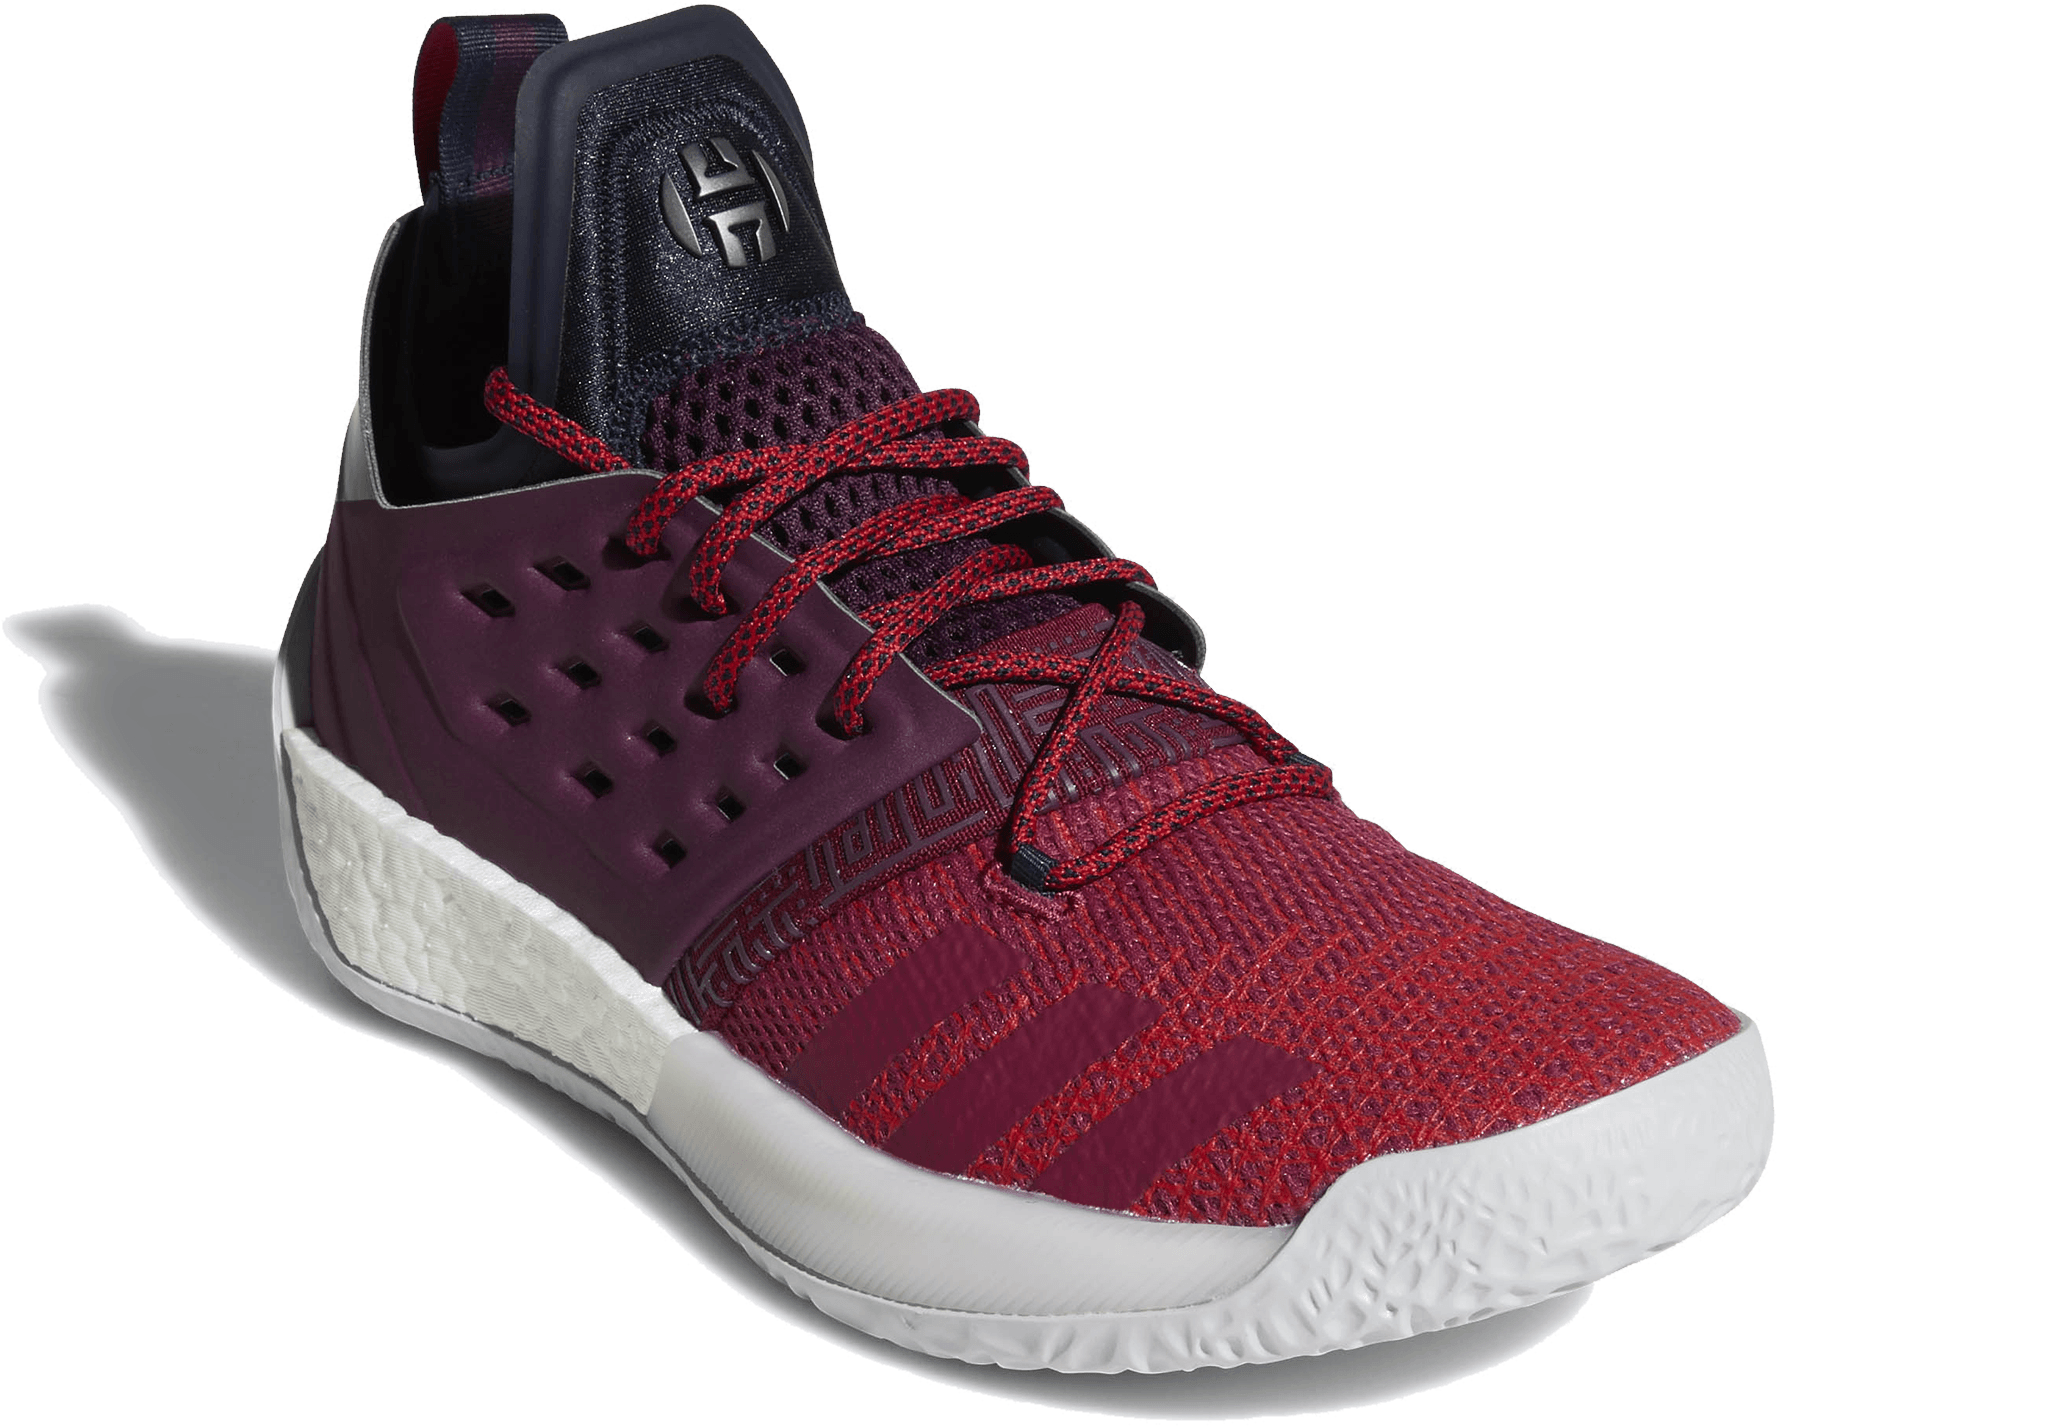 Adidas Harden Vol. 2 Performance Review